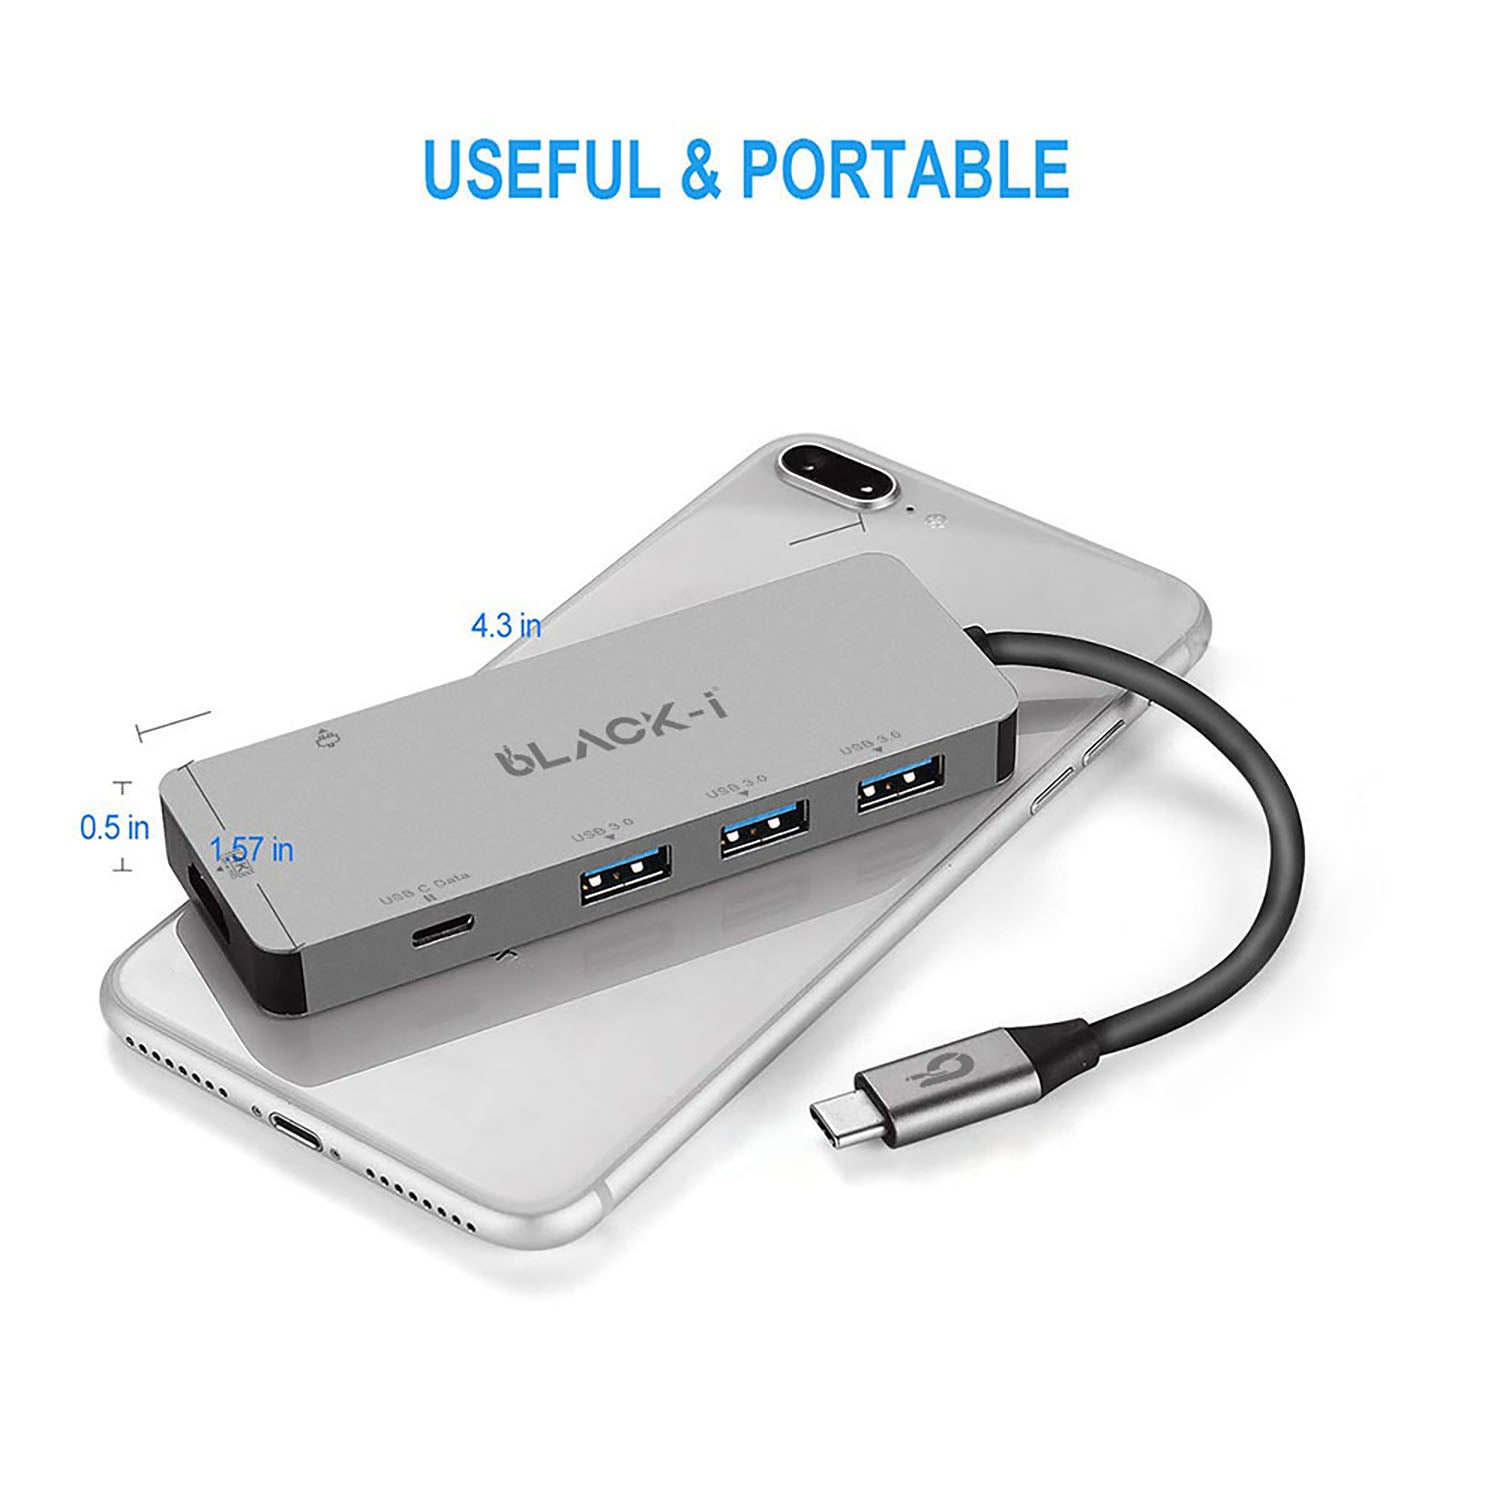 Black-i USB-C to HDMI, USB 3.0, USB-C & PD Hub – All-in-One Connectivity Solution for Enhanced Productivity and Multimedia Experience